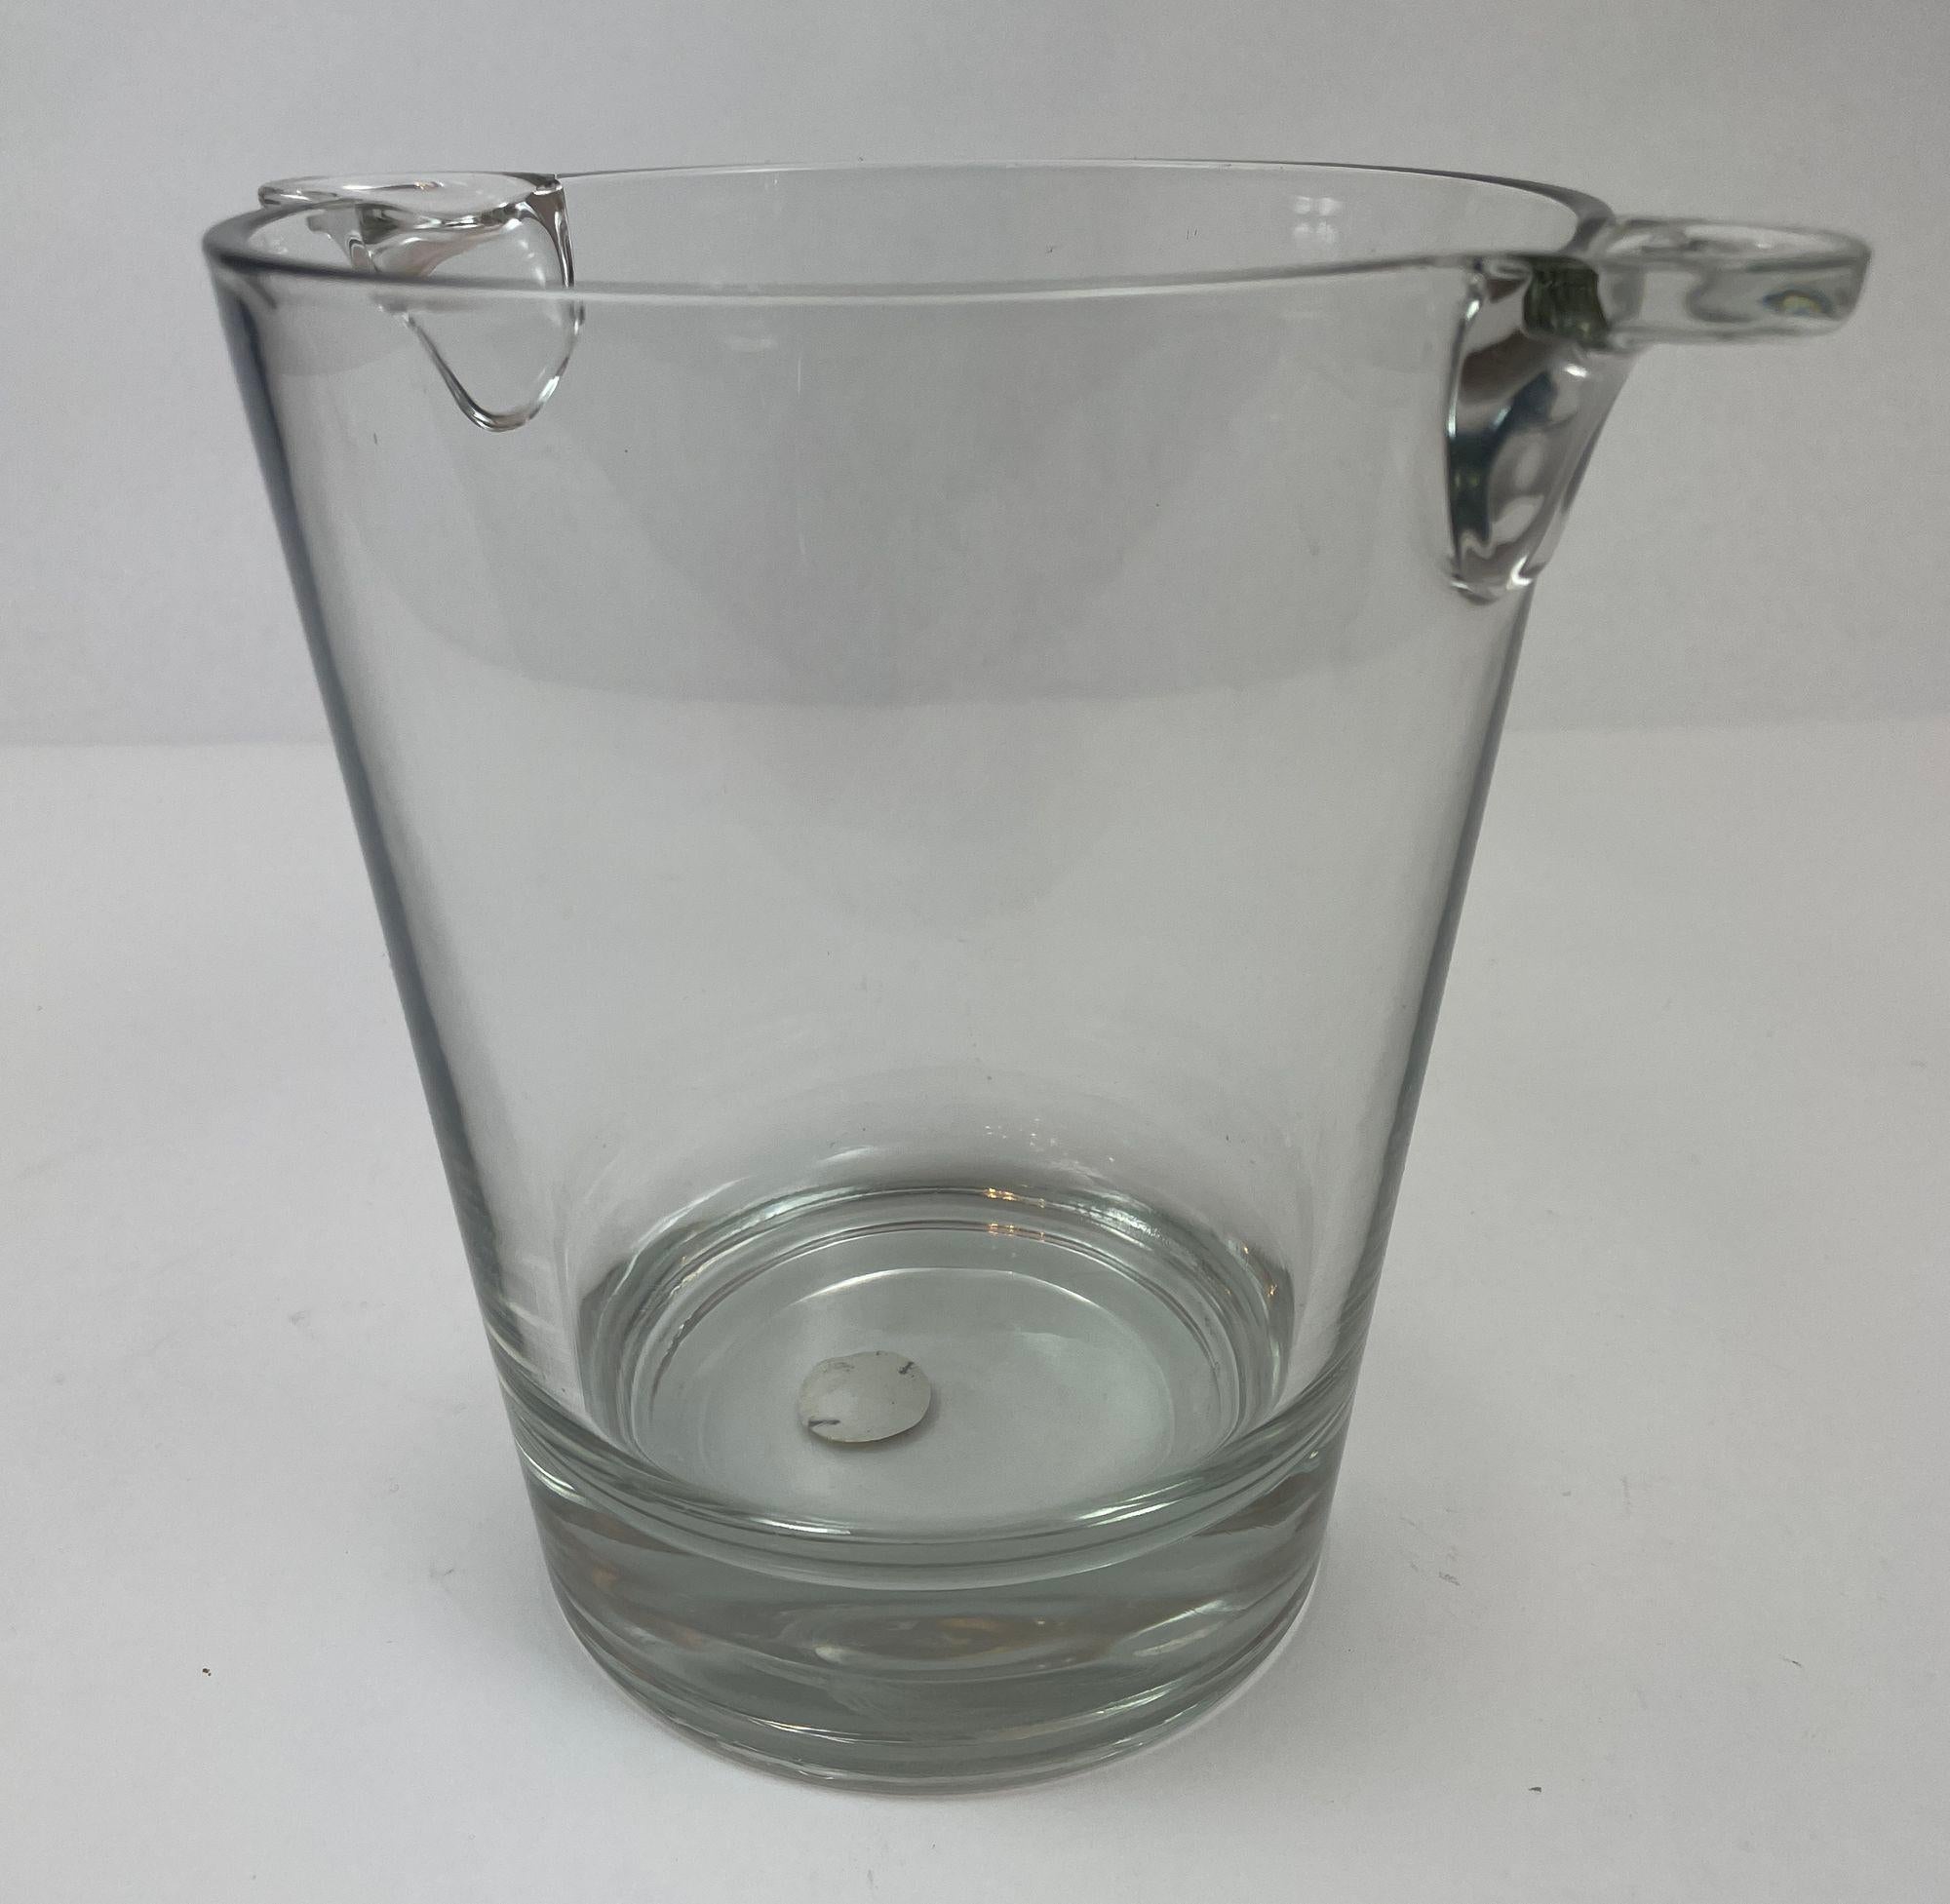 Vintage Cut Glass Crystal Ice Bucket by Cristal D'Arques France.
Vintage from the 1980's.
Very nice crystal ice bucket made in France.
Dimensions: 6.5